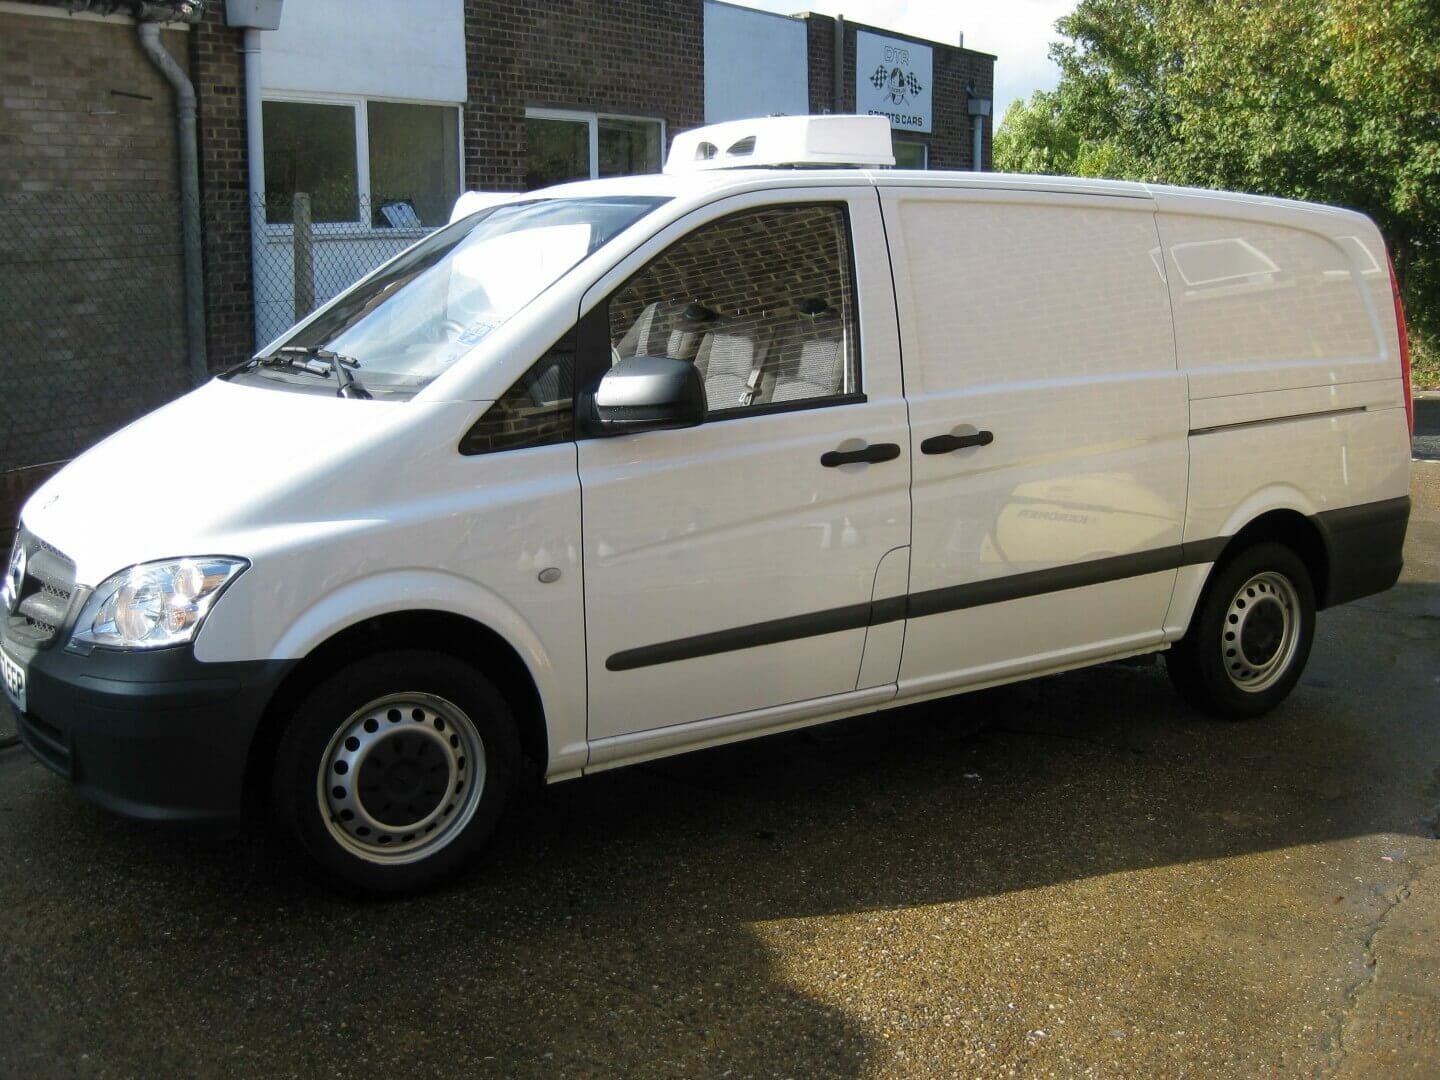 New Mercedes Vito Refrigerated Van For Sale